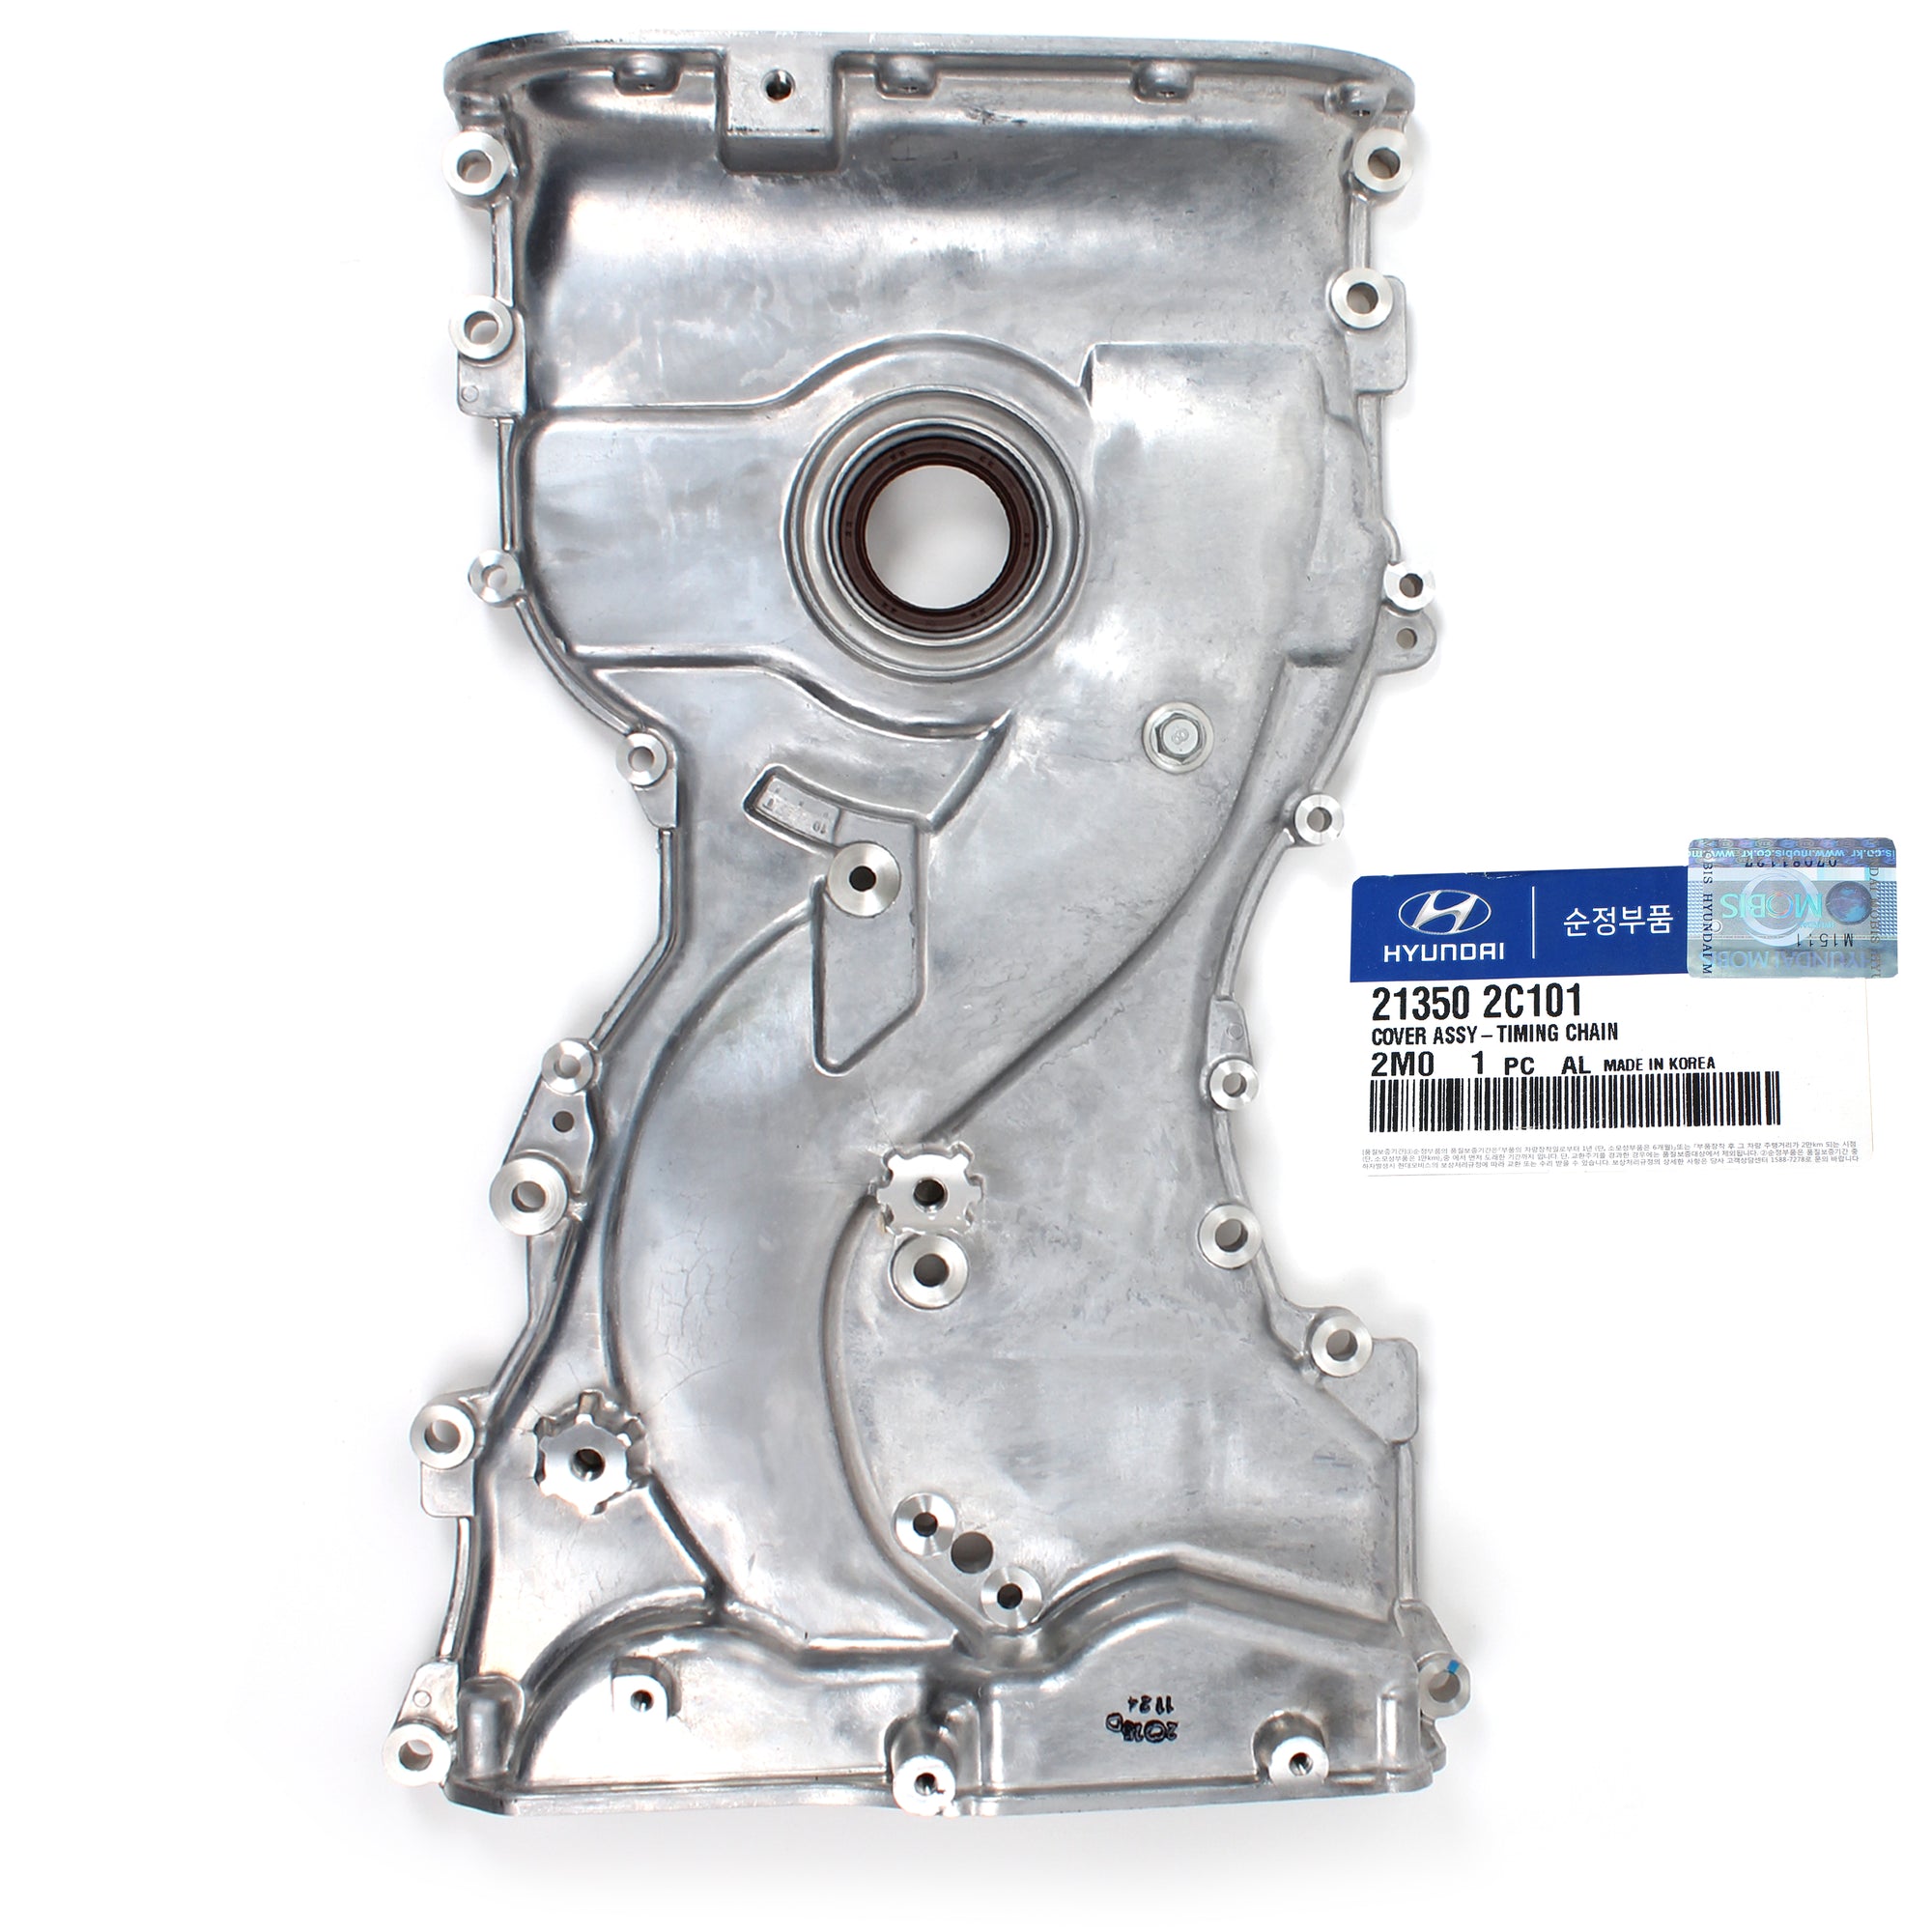 GENUINE Timing Chain Cover for 2010-2014 Hyundai Genesis Coupe 2.0L 213502C101